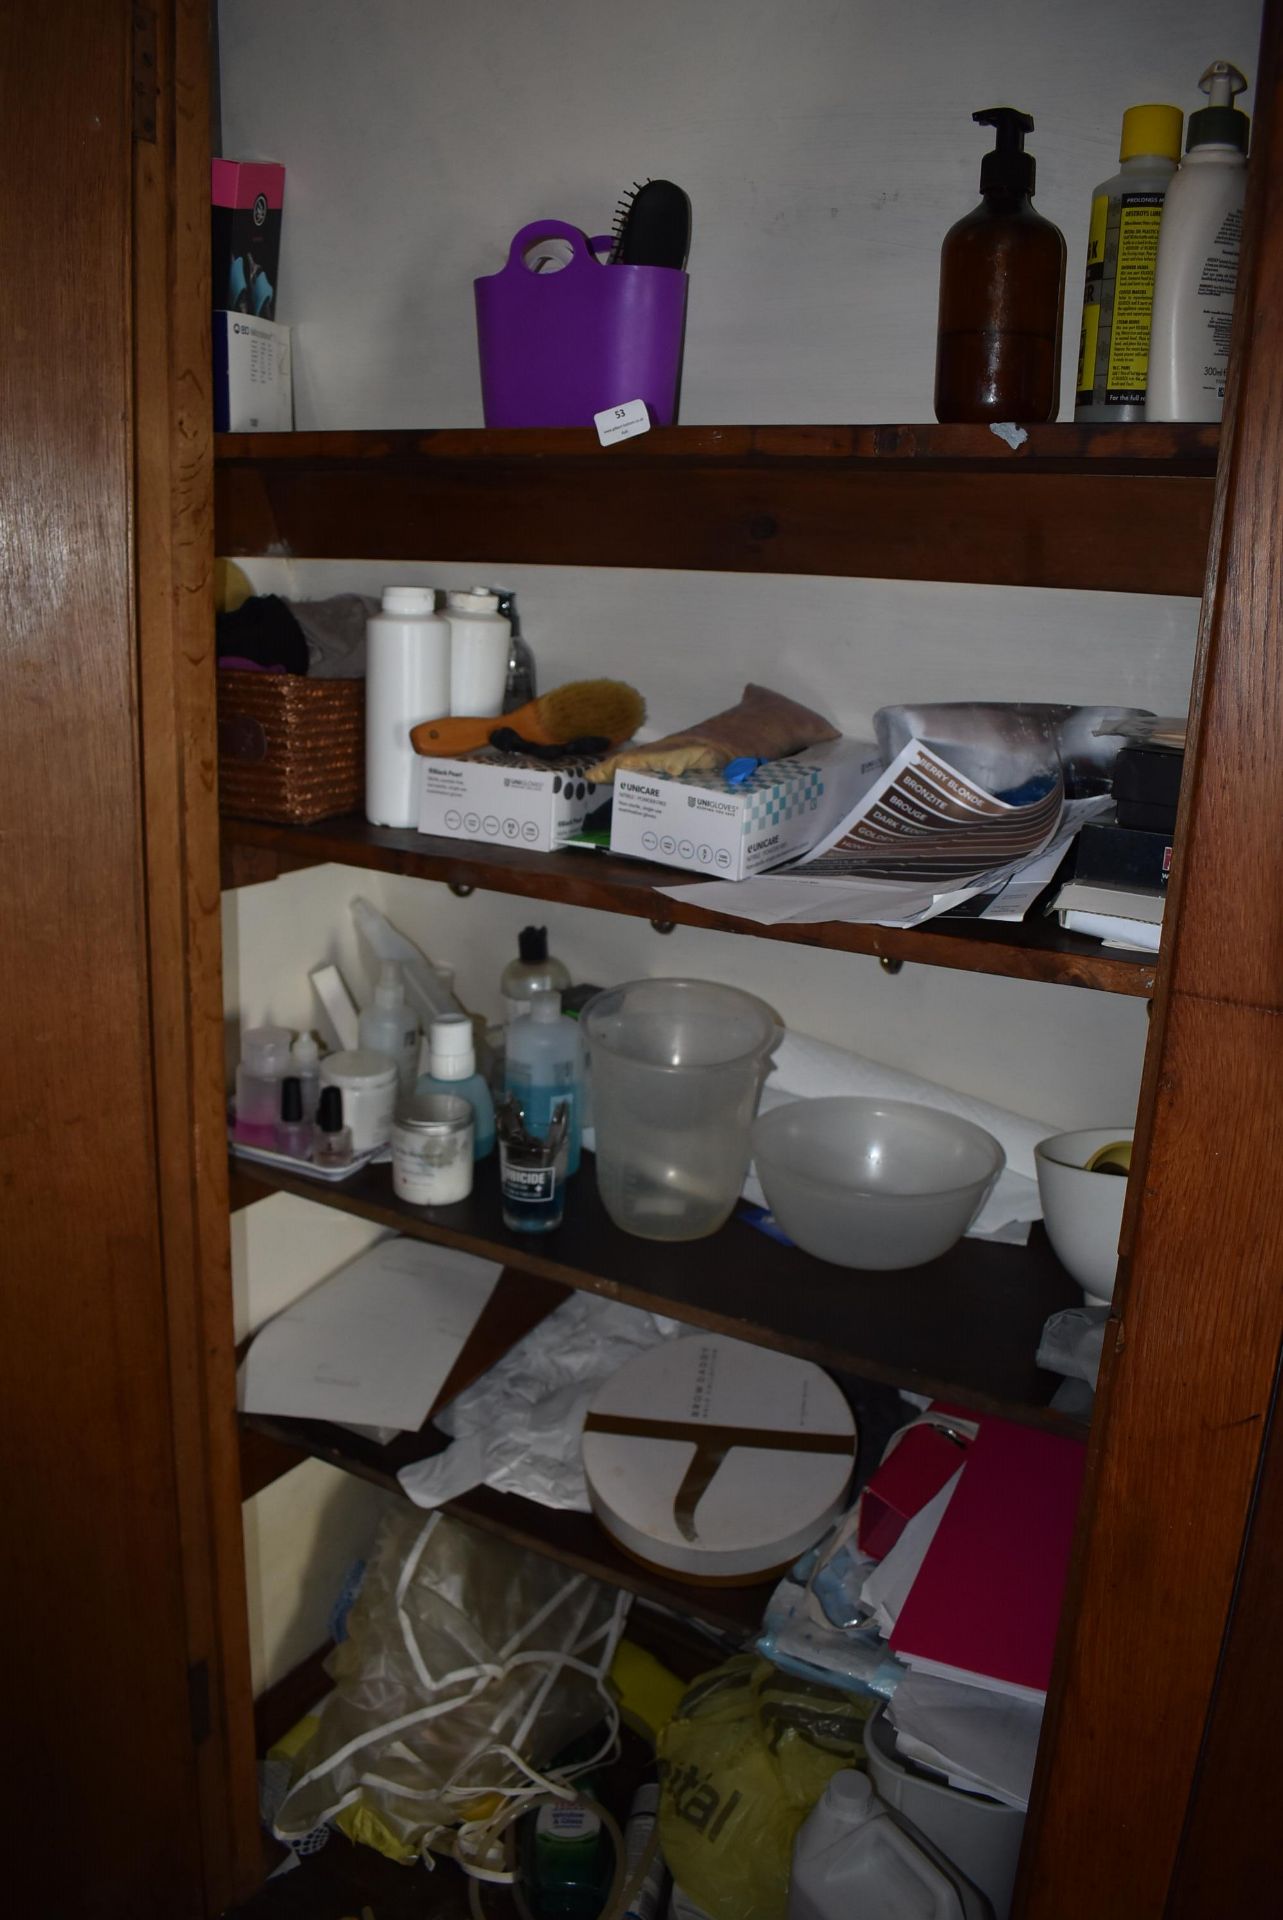 *Contents of Cupboard o Include Various Disposable Item, PPE, Sterilising Solution, etc.